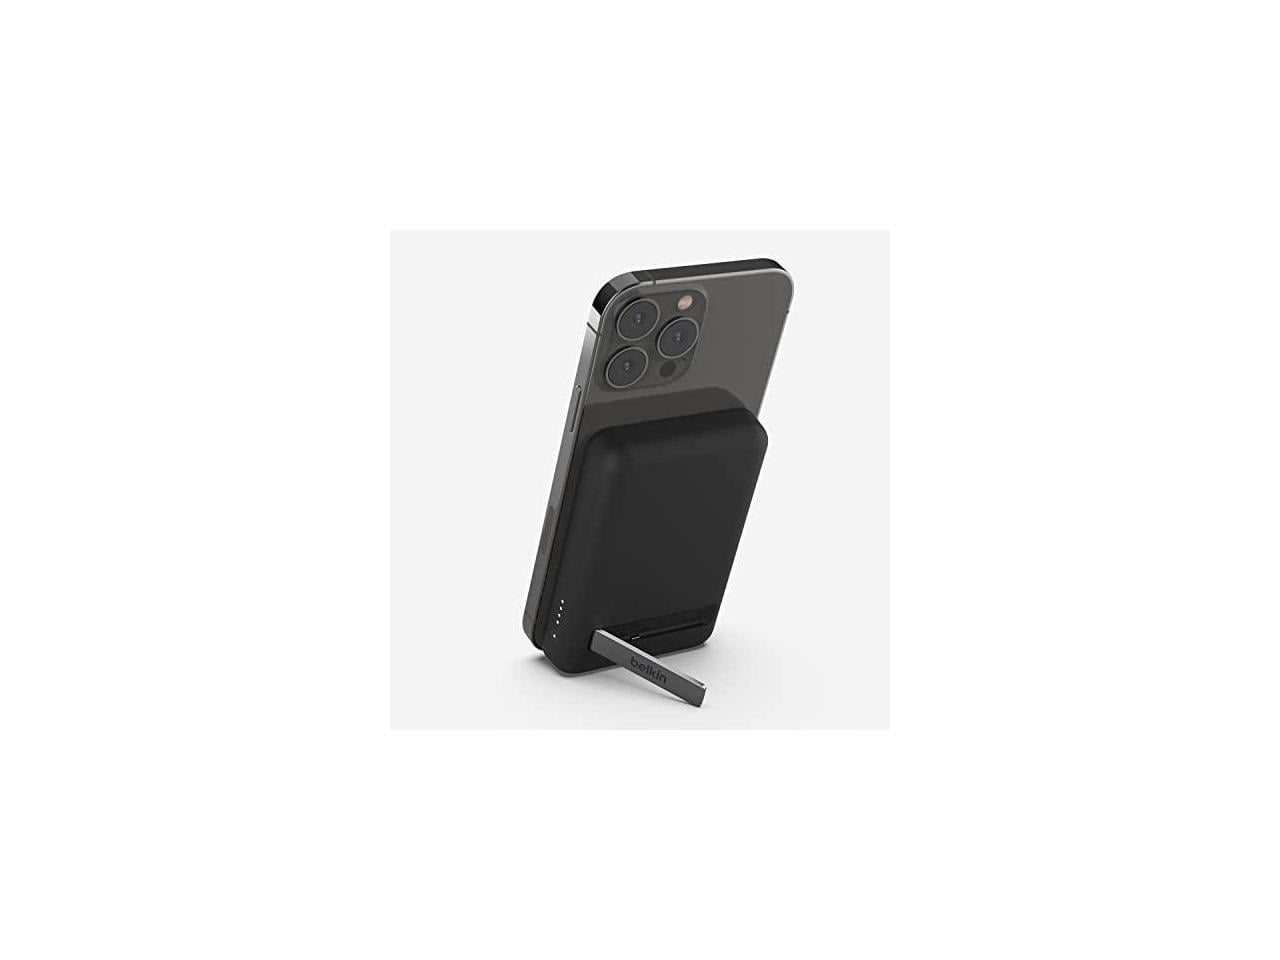 Picture of Belkin BPD004btBK 5000 mAh Magnetic Wireless Power for iPhone 13 Pro, iPhone 12 - Black